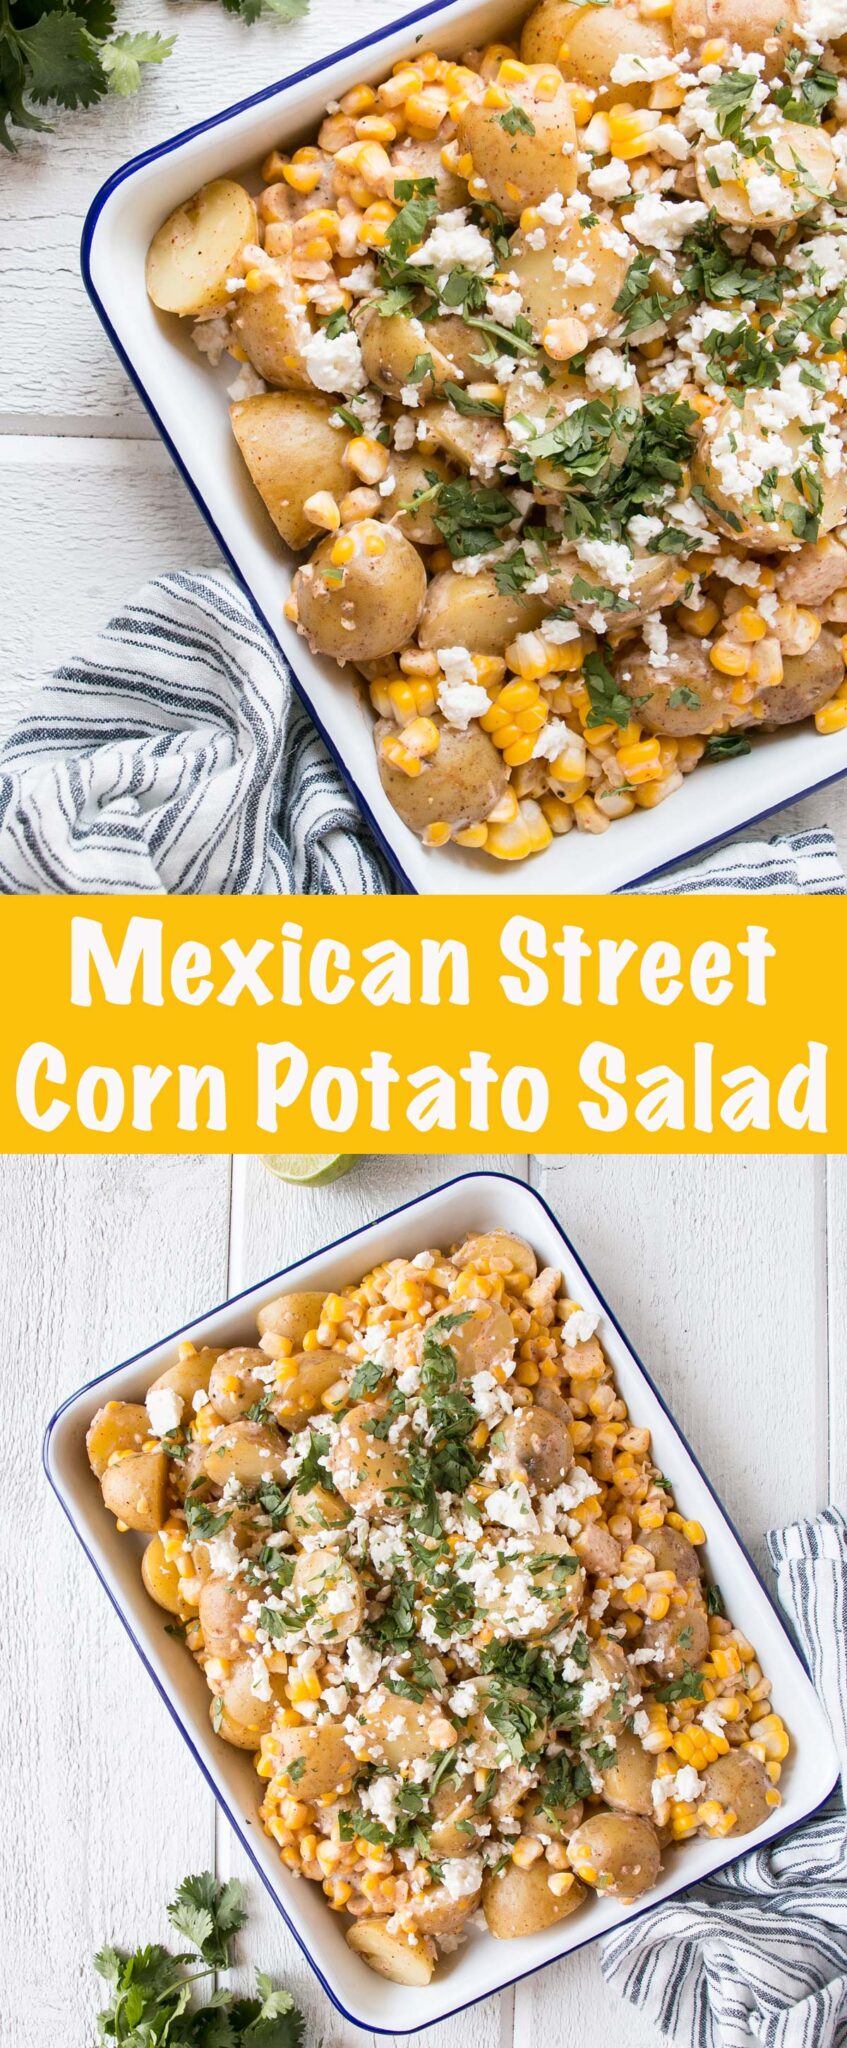 Mexican Street Corn Potato Salad is a delicious and easy potato salad recipe. Bright and flavourful, the Mexican Street Corn element adds some fiesta to a classic potato salad.  via @mykitchenlove